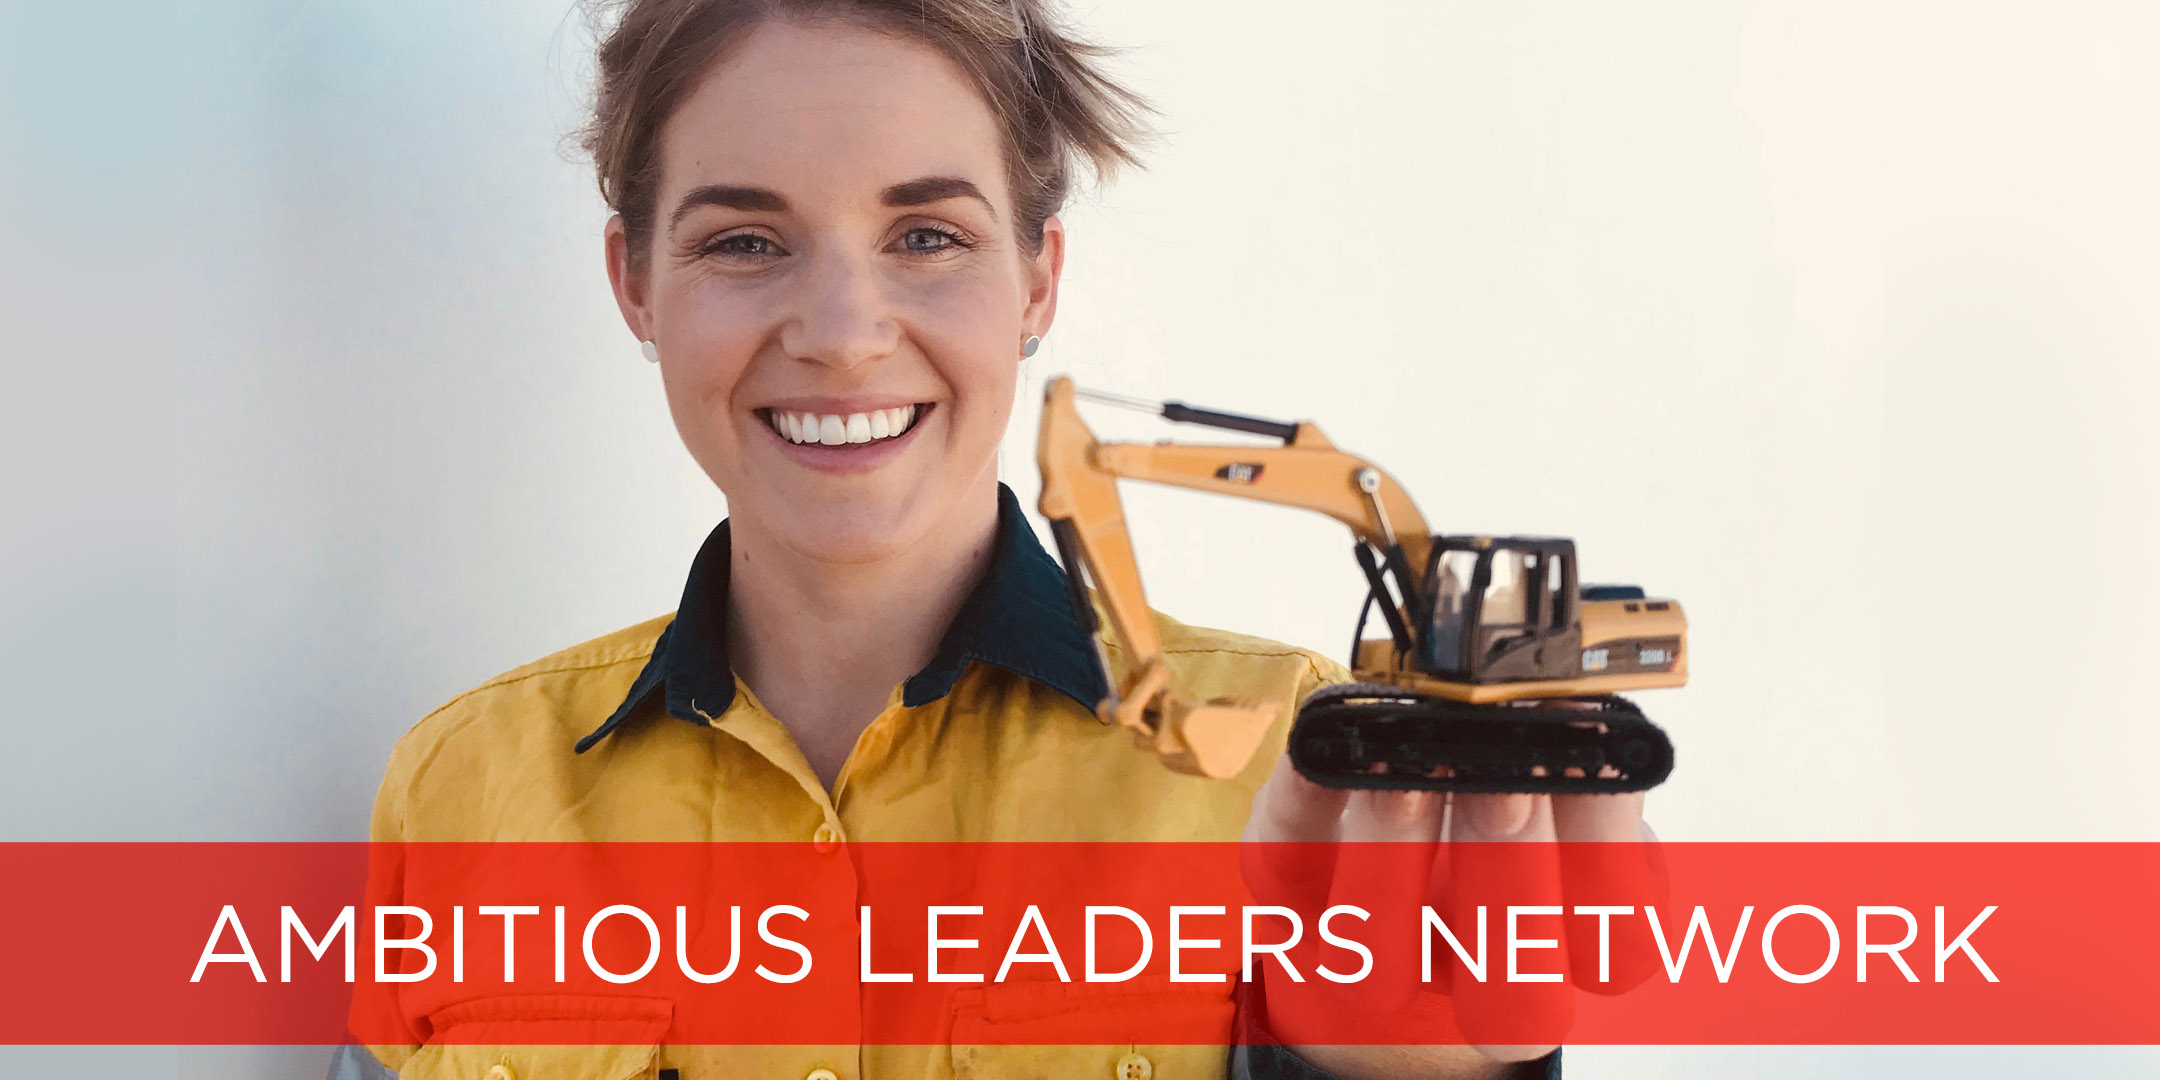 Ambitious Leaders Network - Breanna Cameron